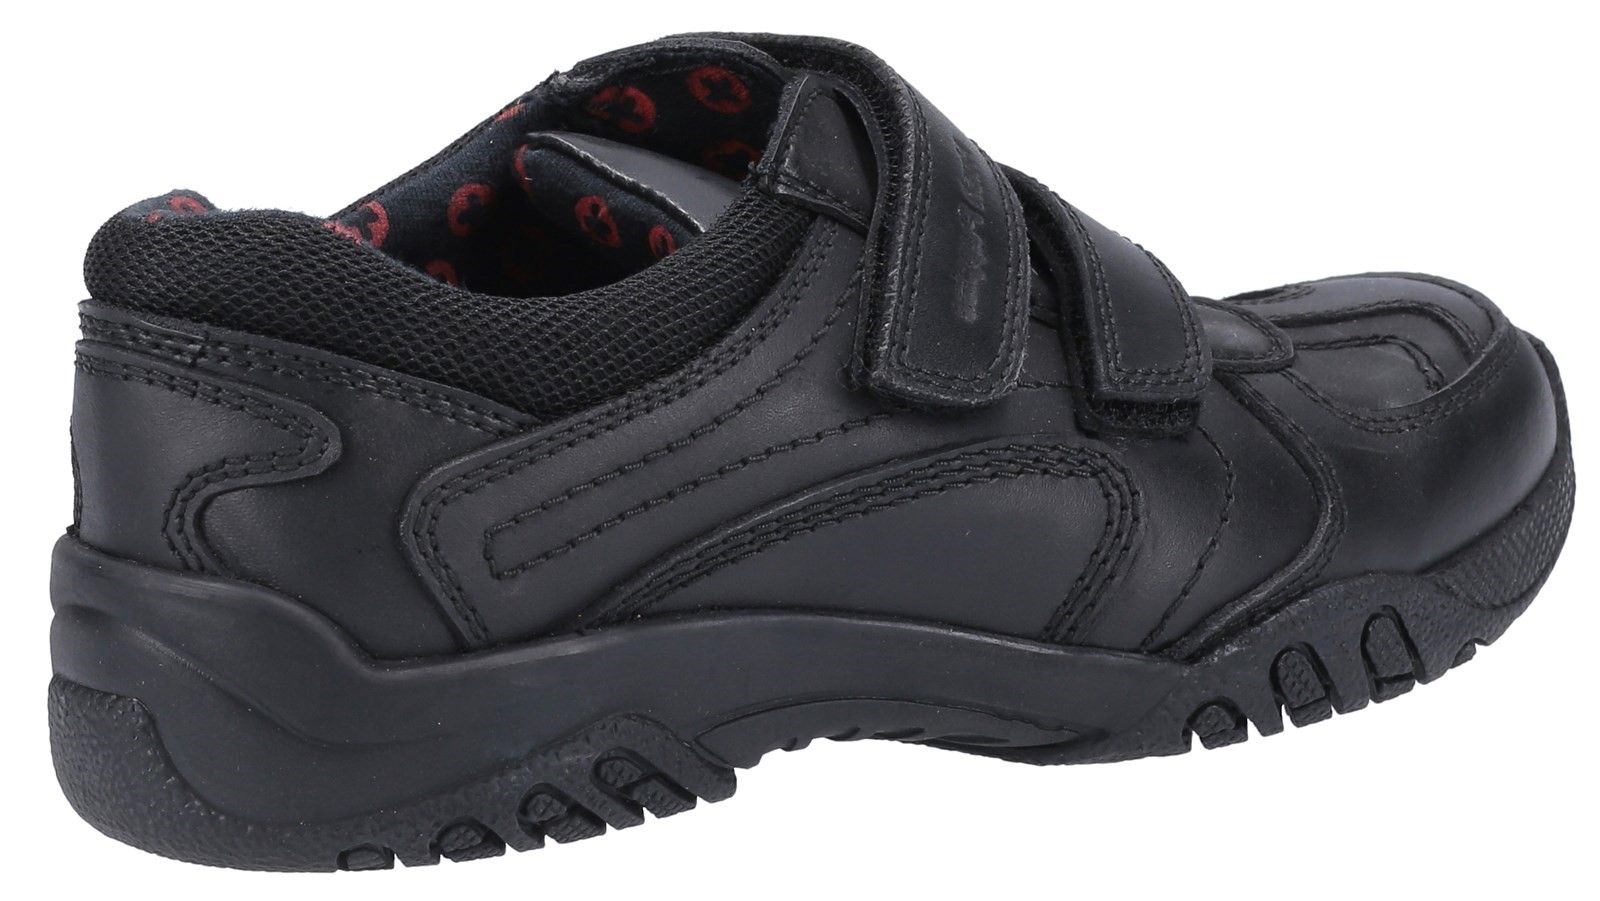 Classic single fit  boys Back to School Shoe from Hush Puppies - Jezza 2 has a leather upper and double touch-fastening strap for ease and adjustable fit. It features a padded collar and a memory foam sock for all day comfort.Leather Upper. 
Memory Foam Insole. 
Micro-Fresh Lining.